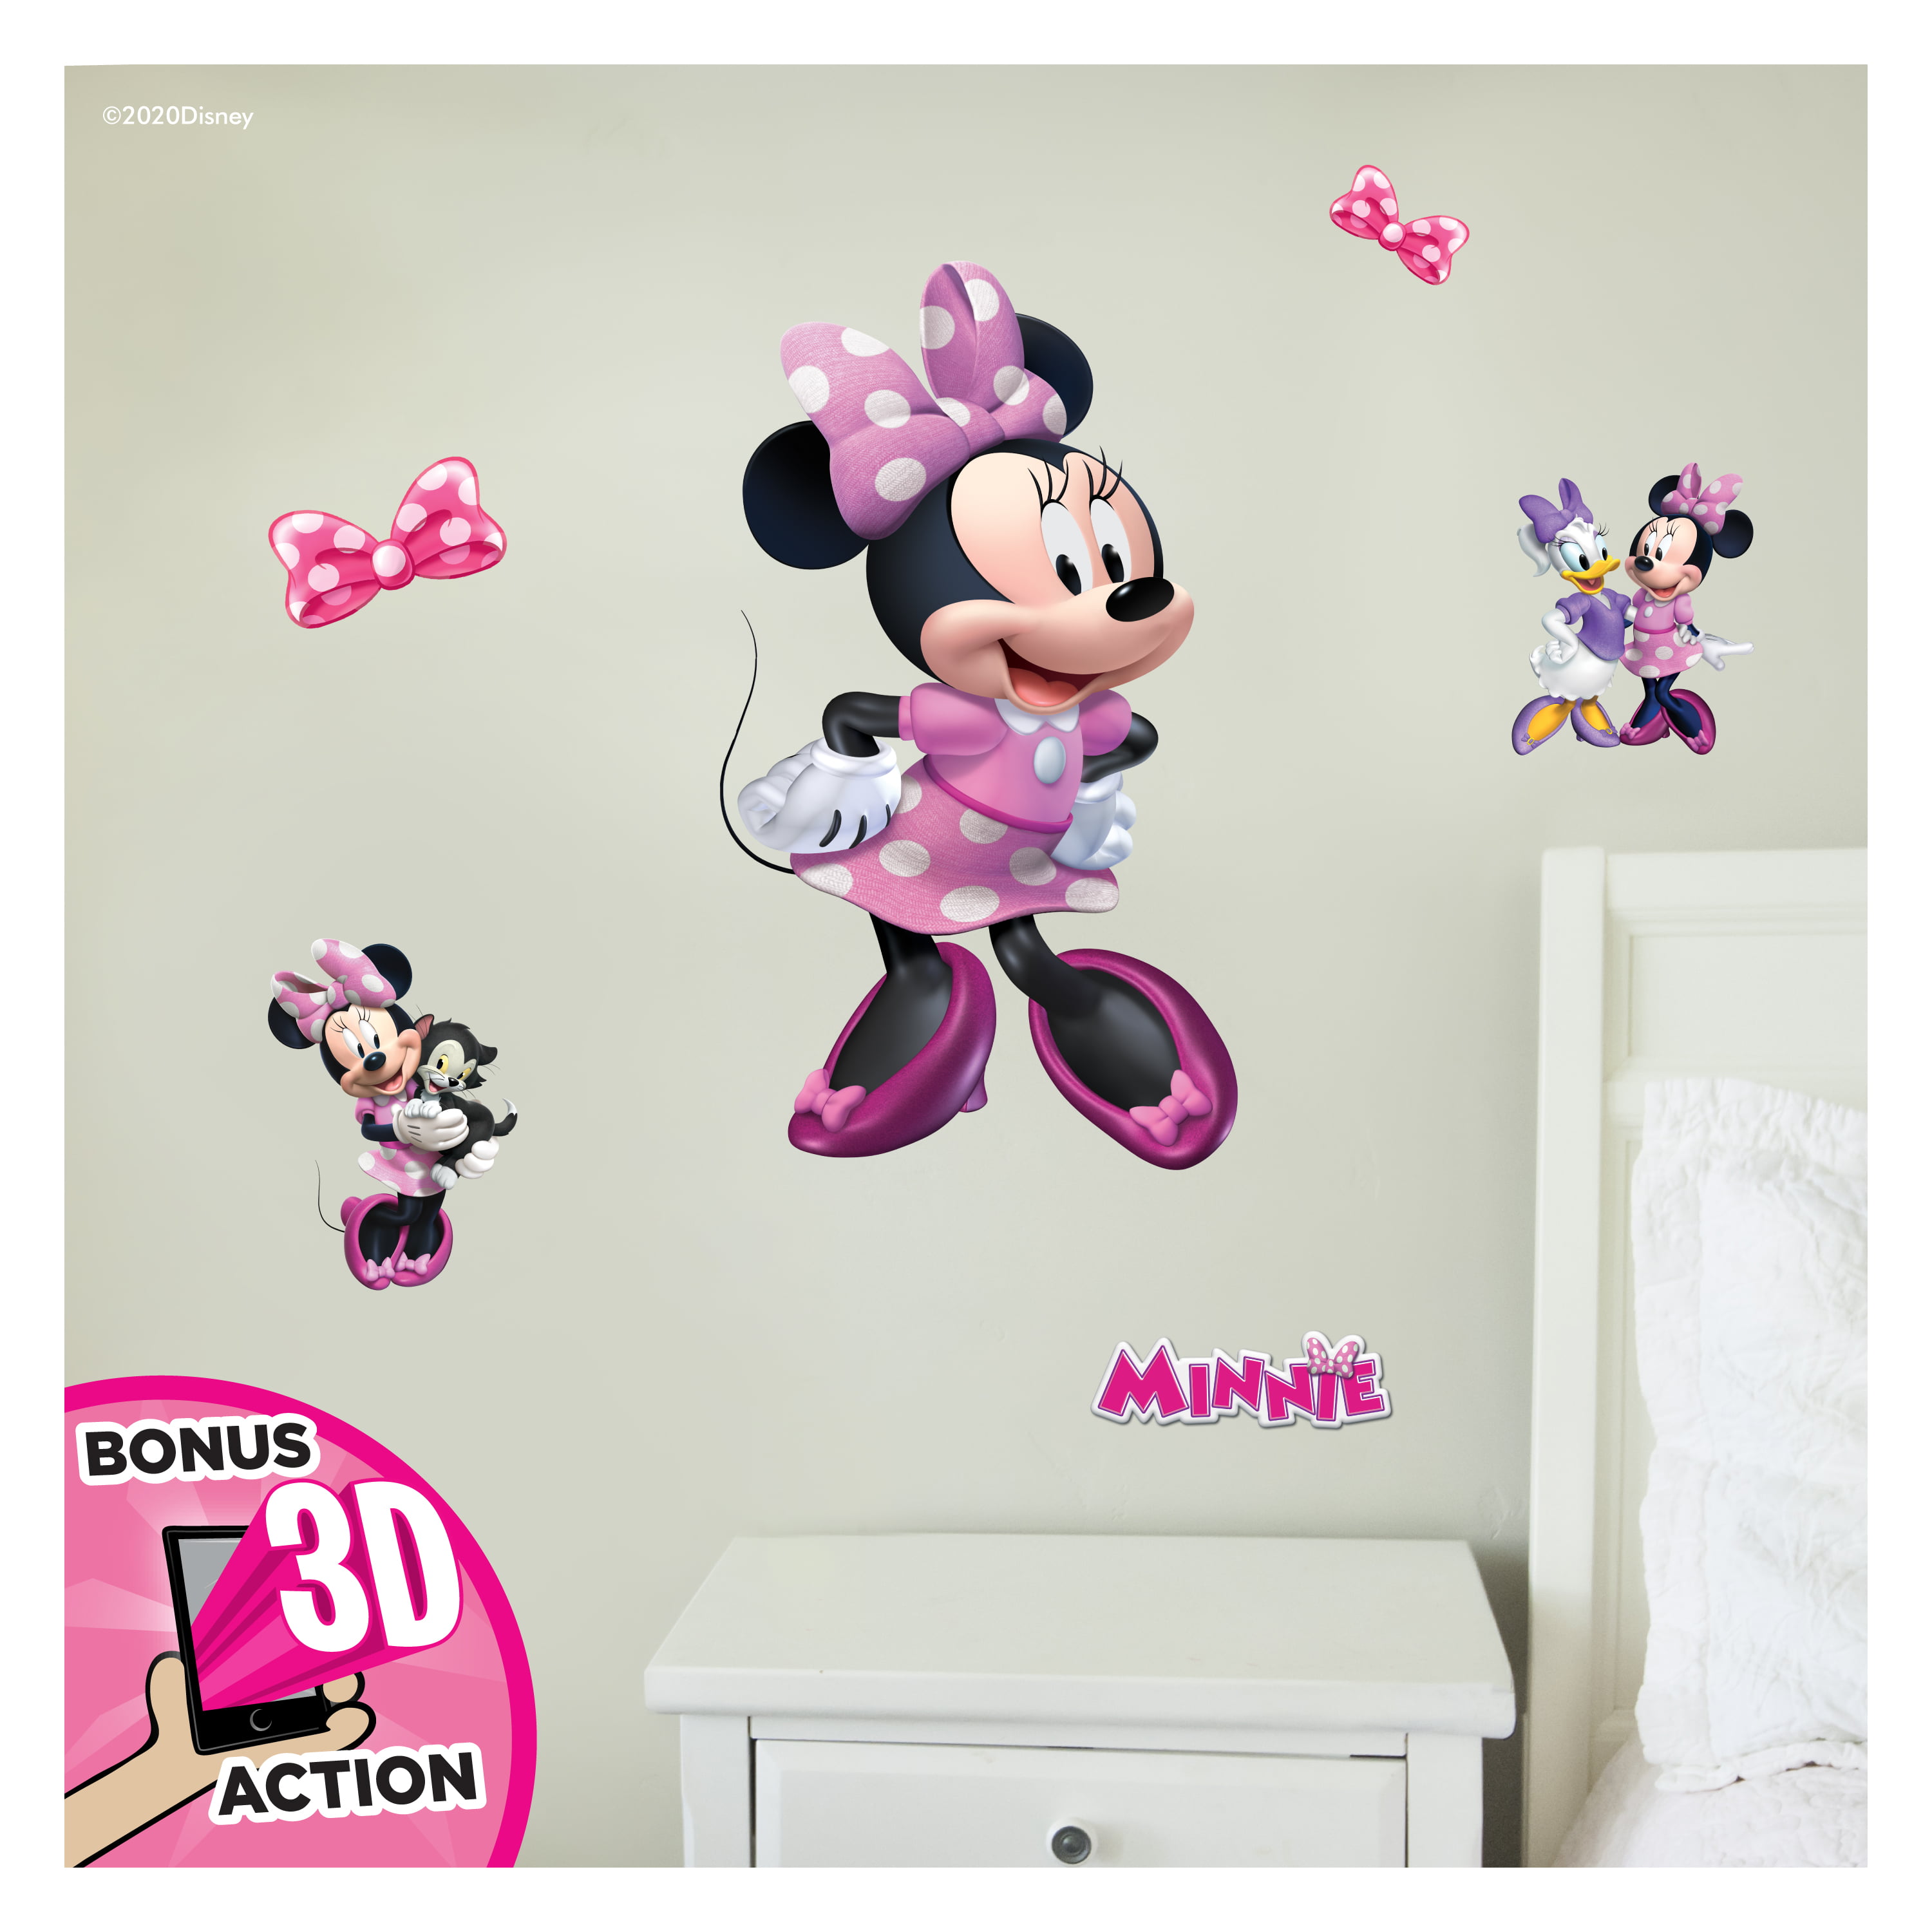 3D Mickey and Minnie Mouse Wall Sticker Kids Baby Nursery Room Wall Decoration 